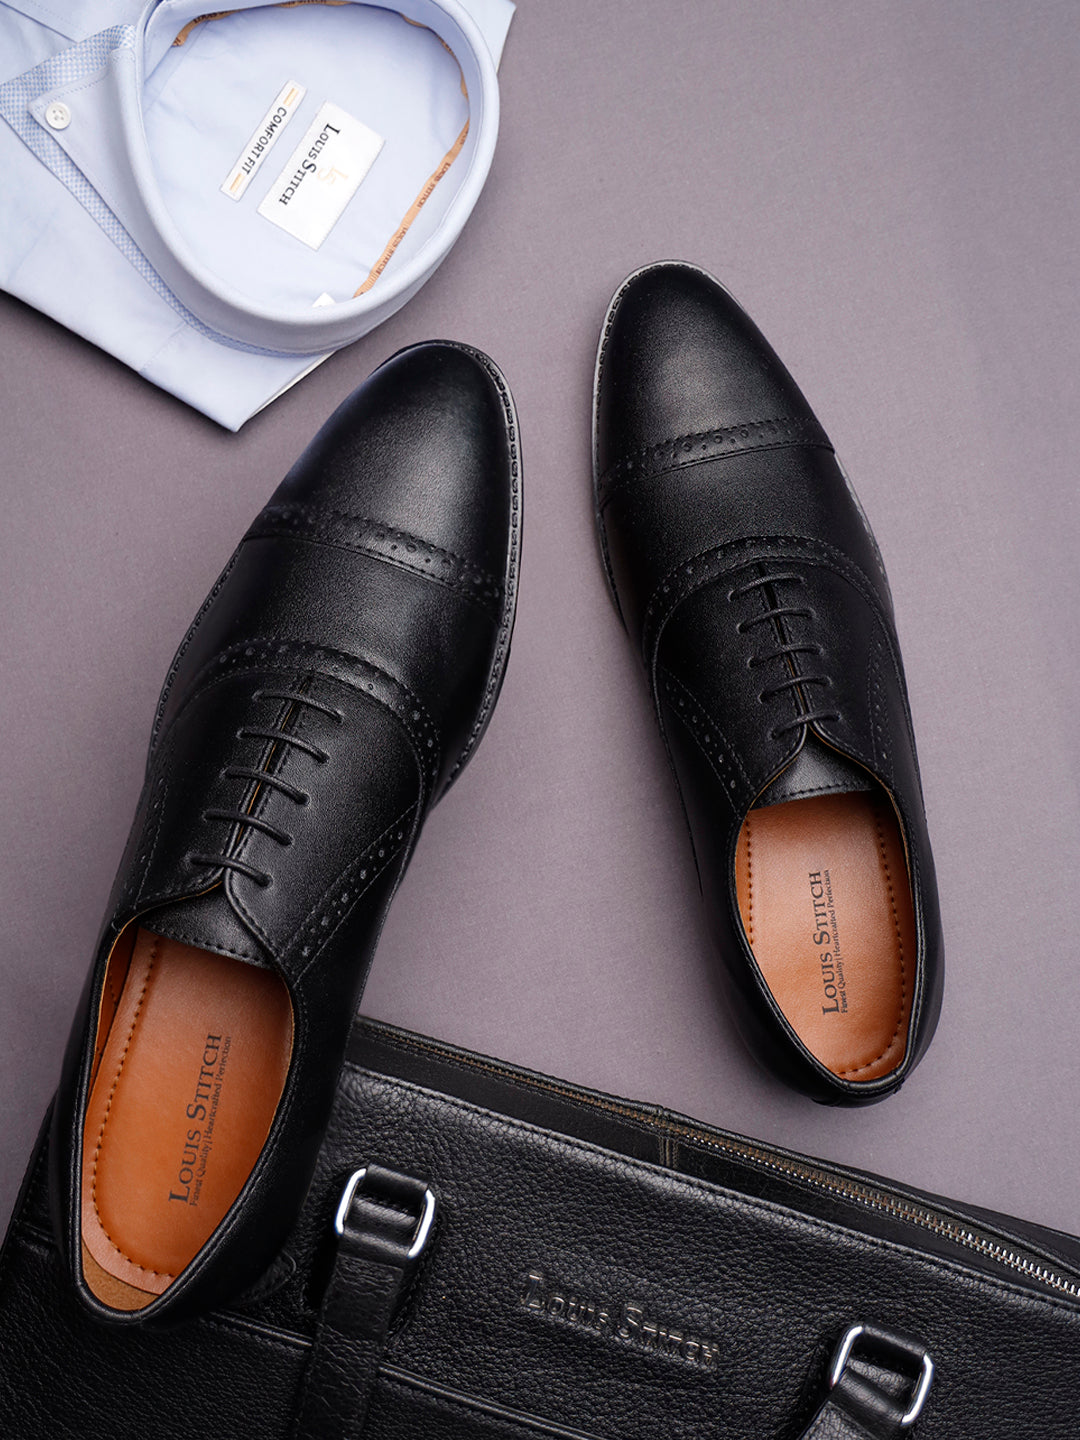 Louis Stitch's premium men's shoe collection redefines elegance! Impeccable  style, unparalleled comfort – every step tells a story